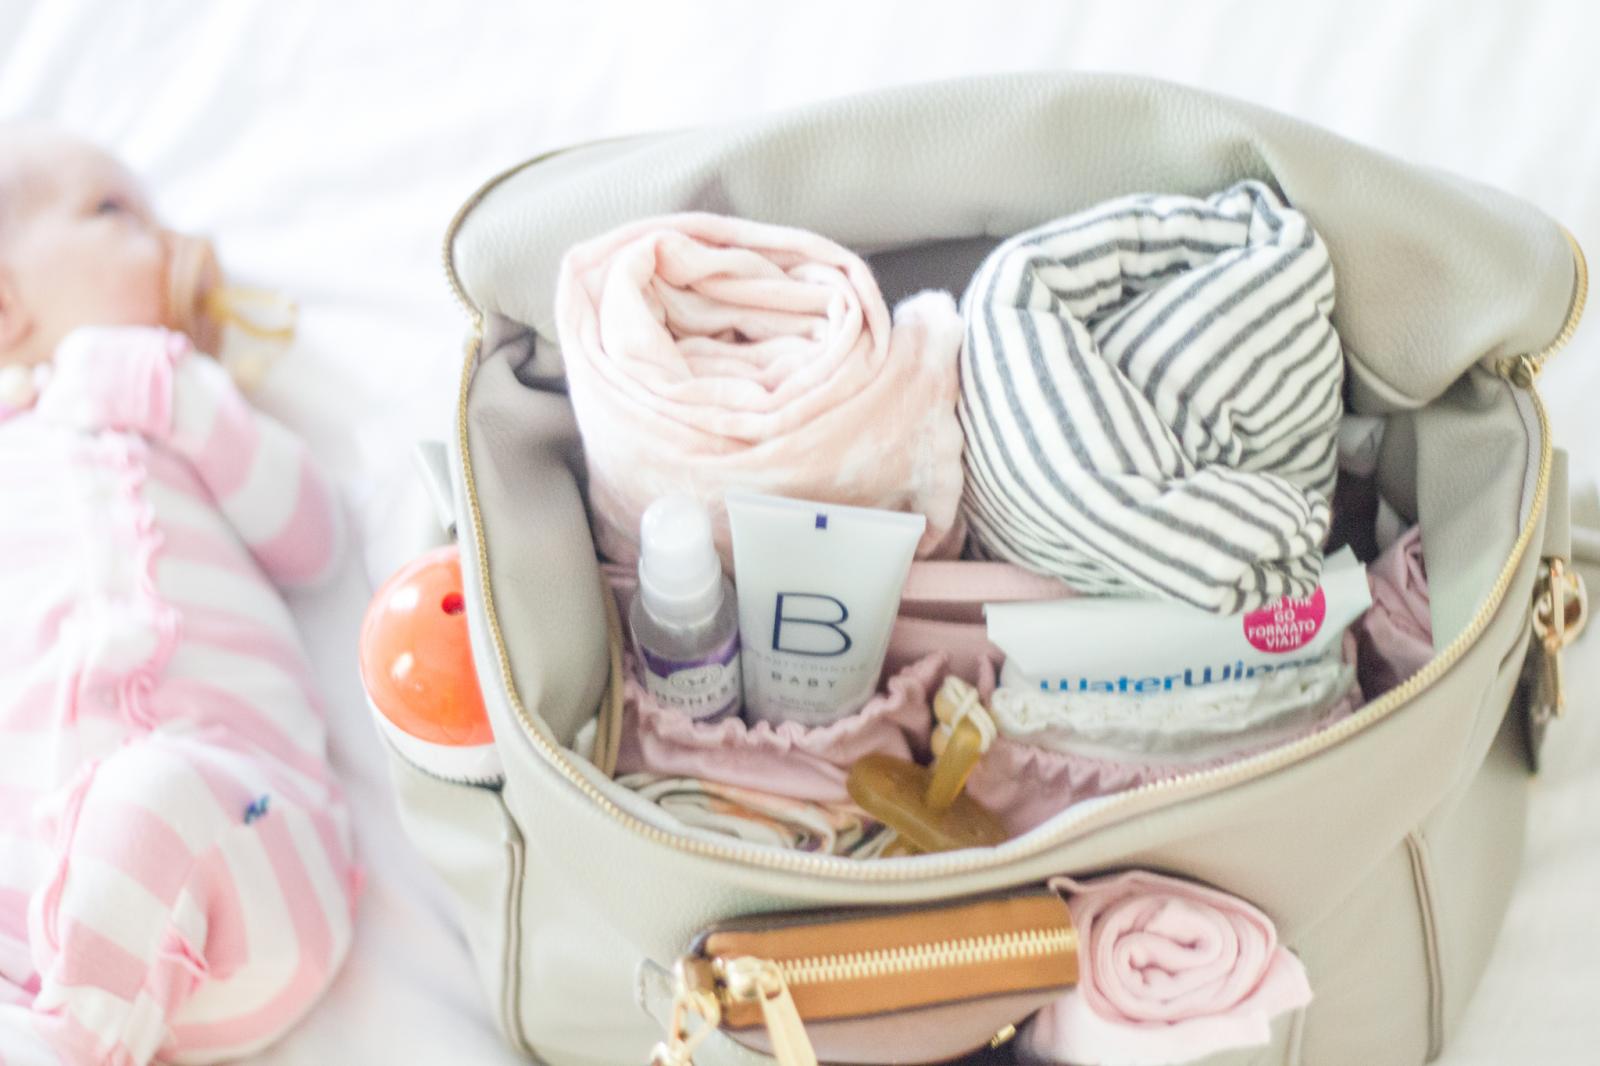 THE STYLISH ALTERNATIVE TO A DIAPER BAG